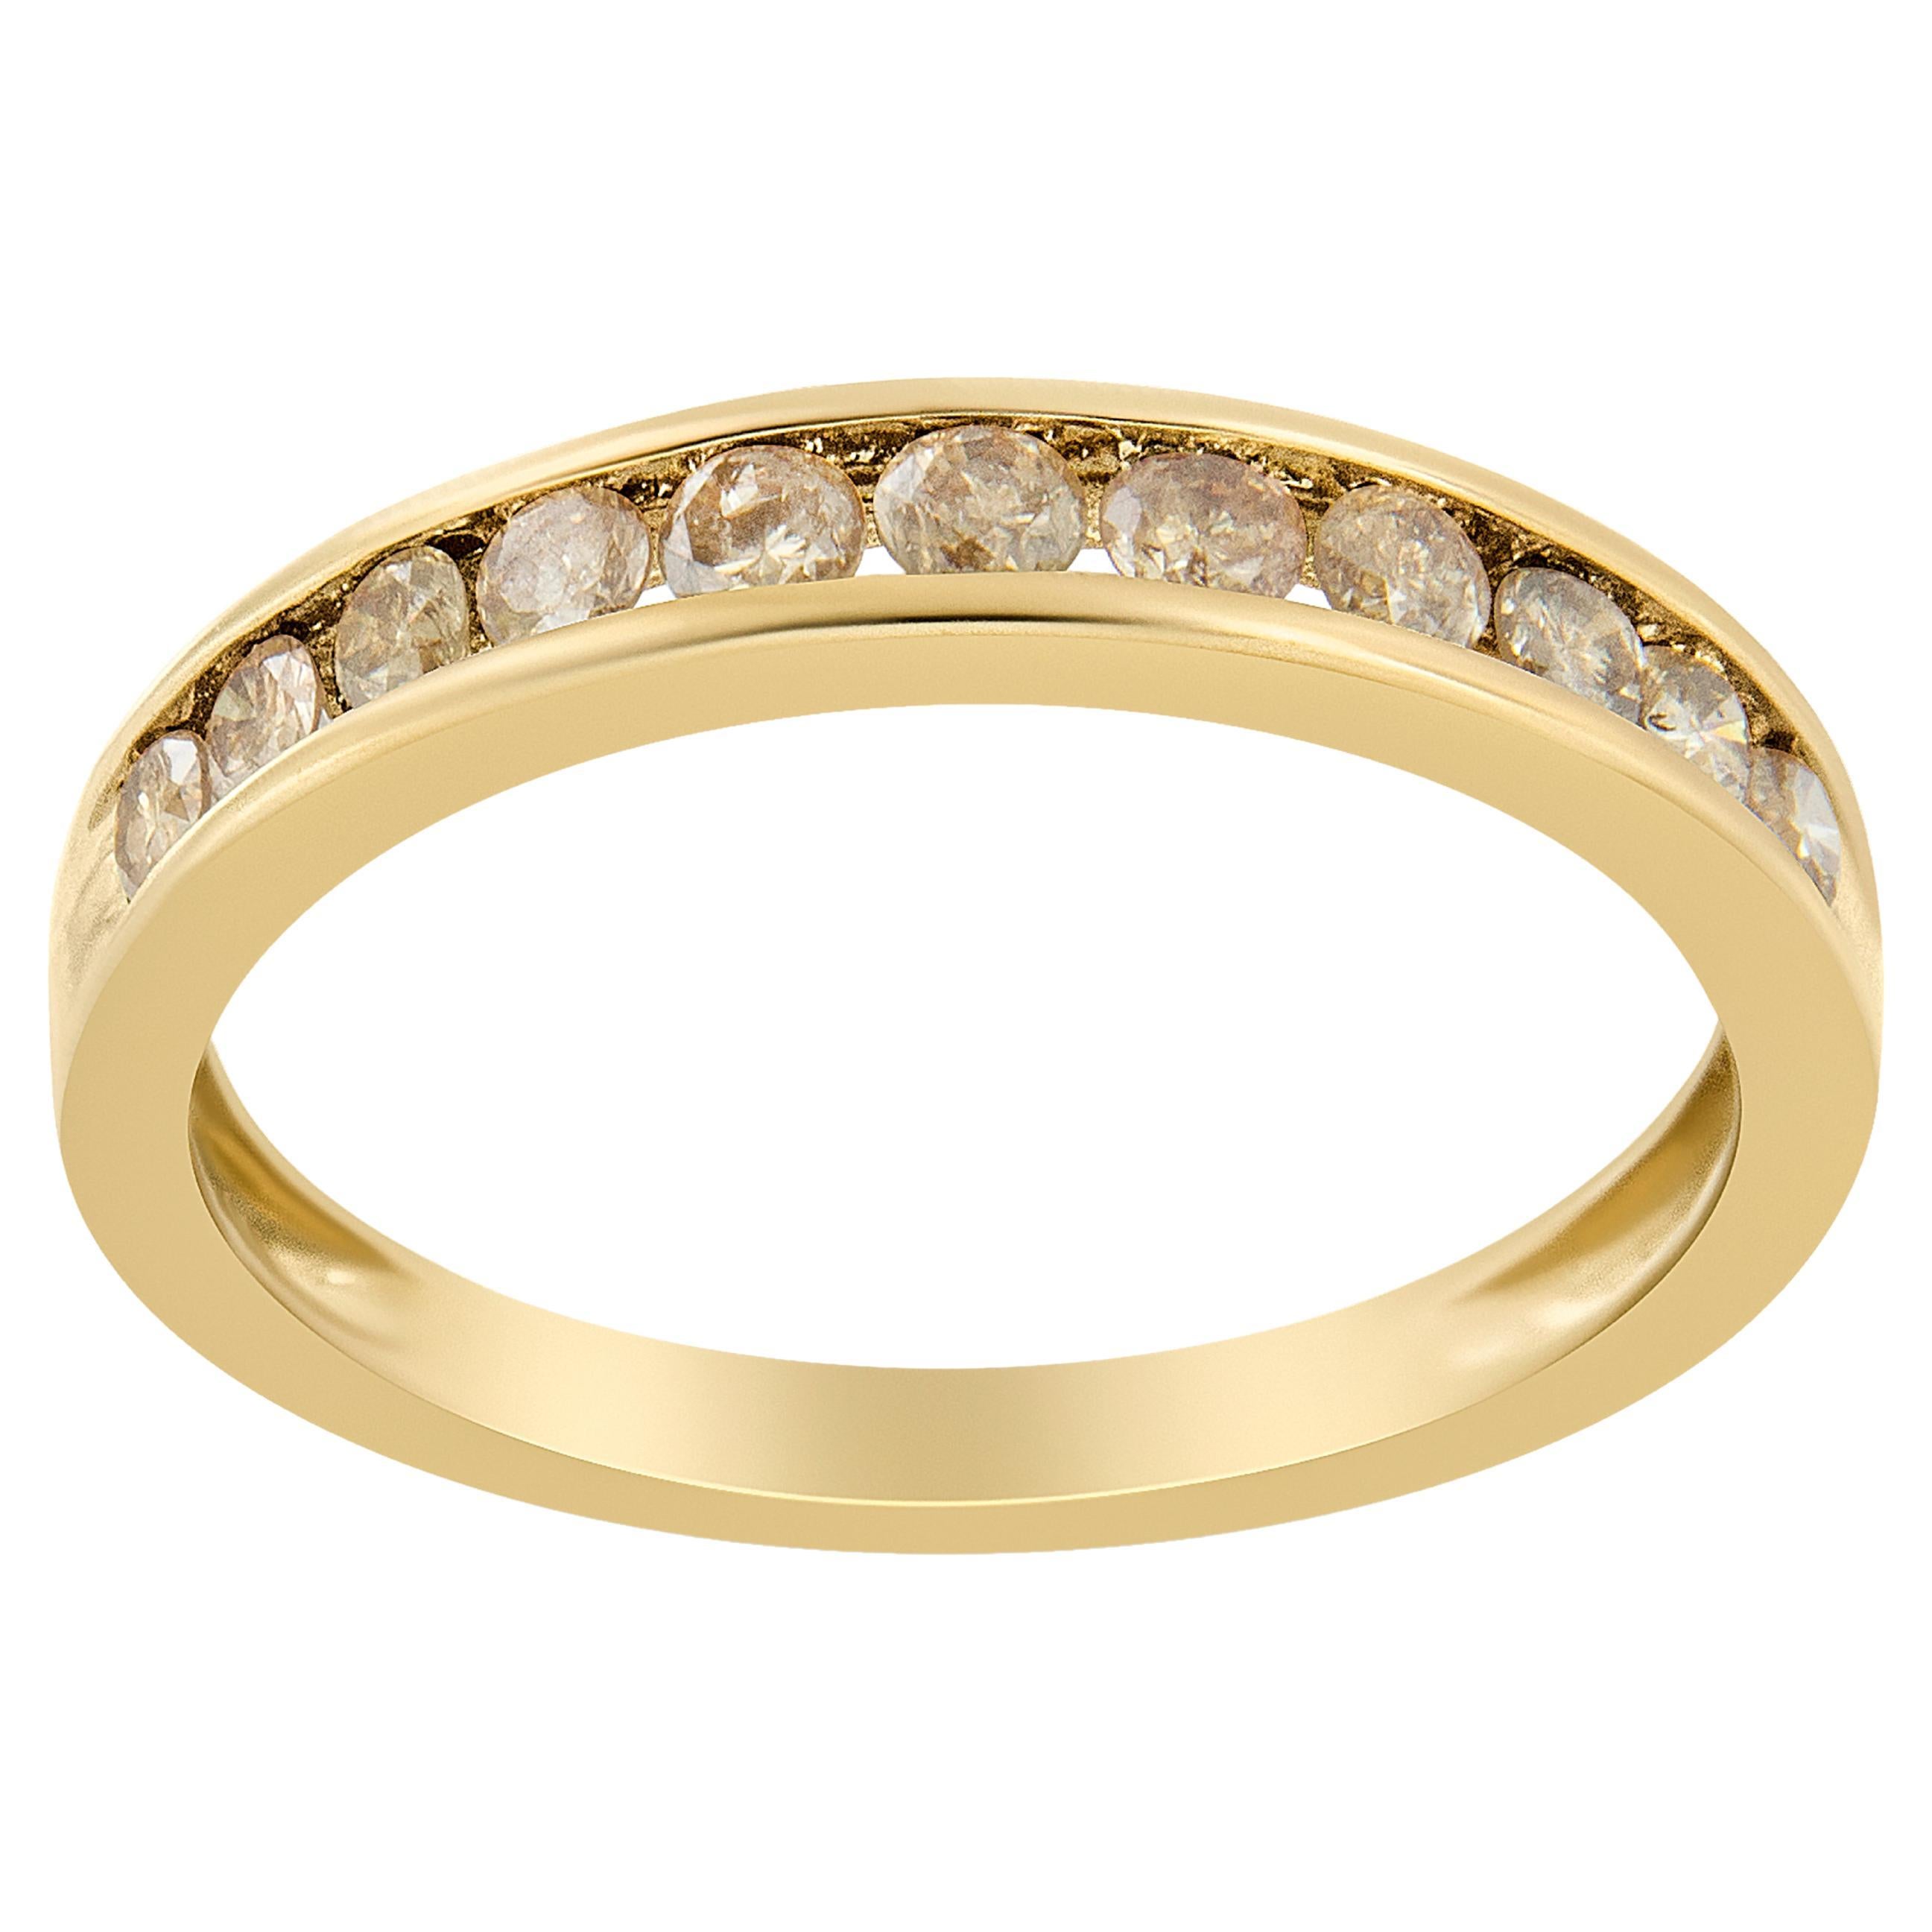 Yellow Gold Plated Sterling Silver 1/2 Carat Diamond Anniversary Band Ring